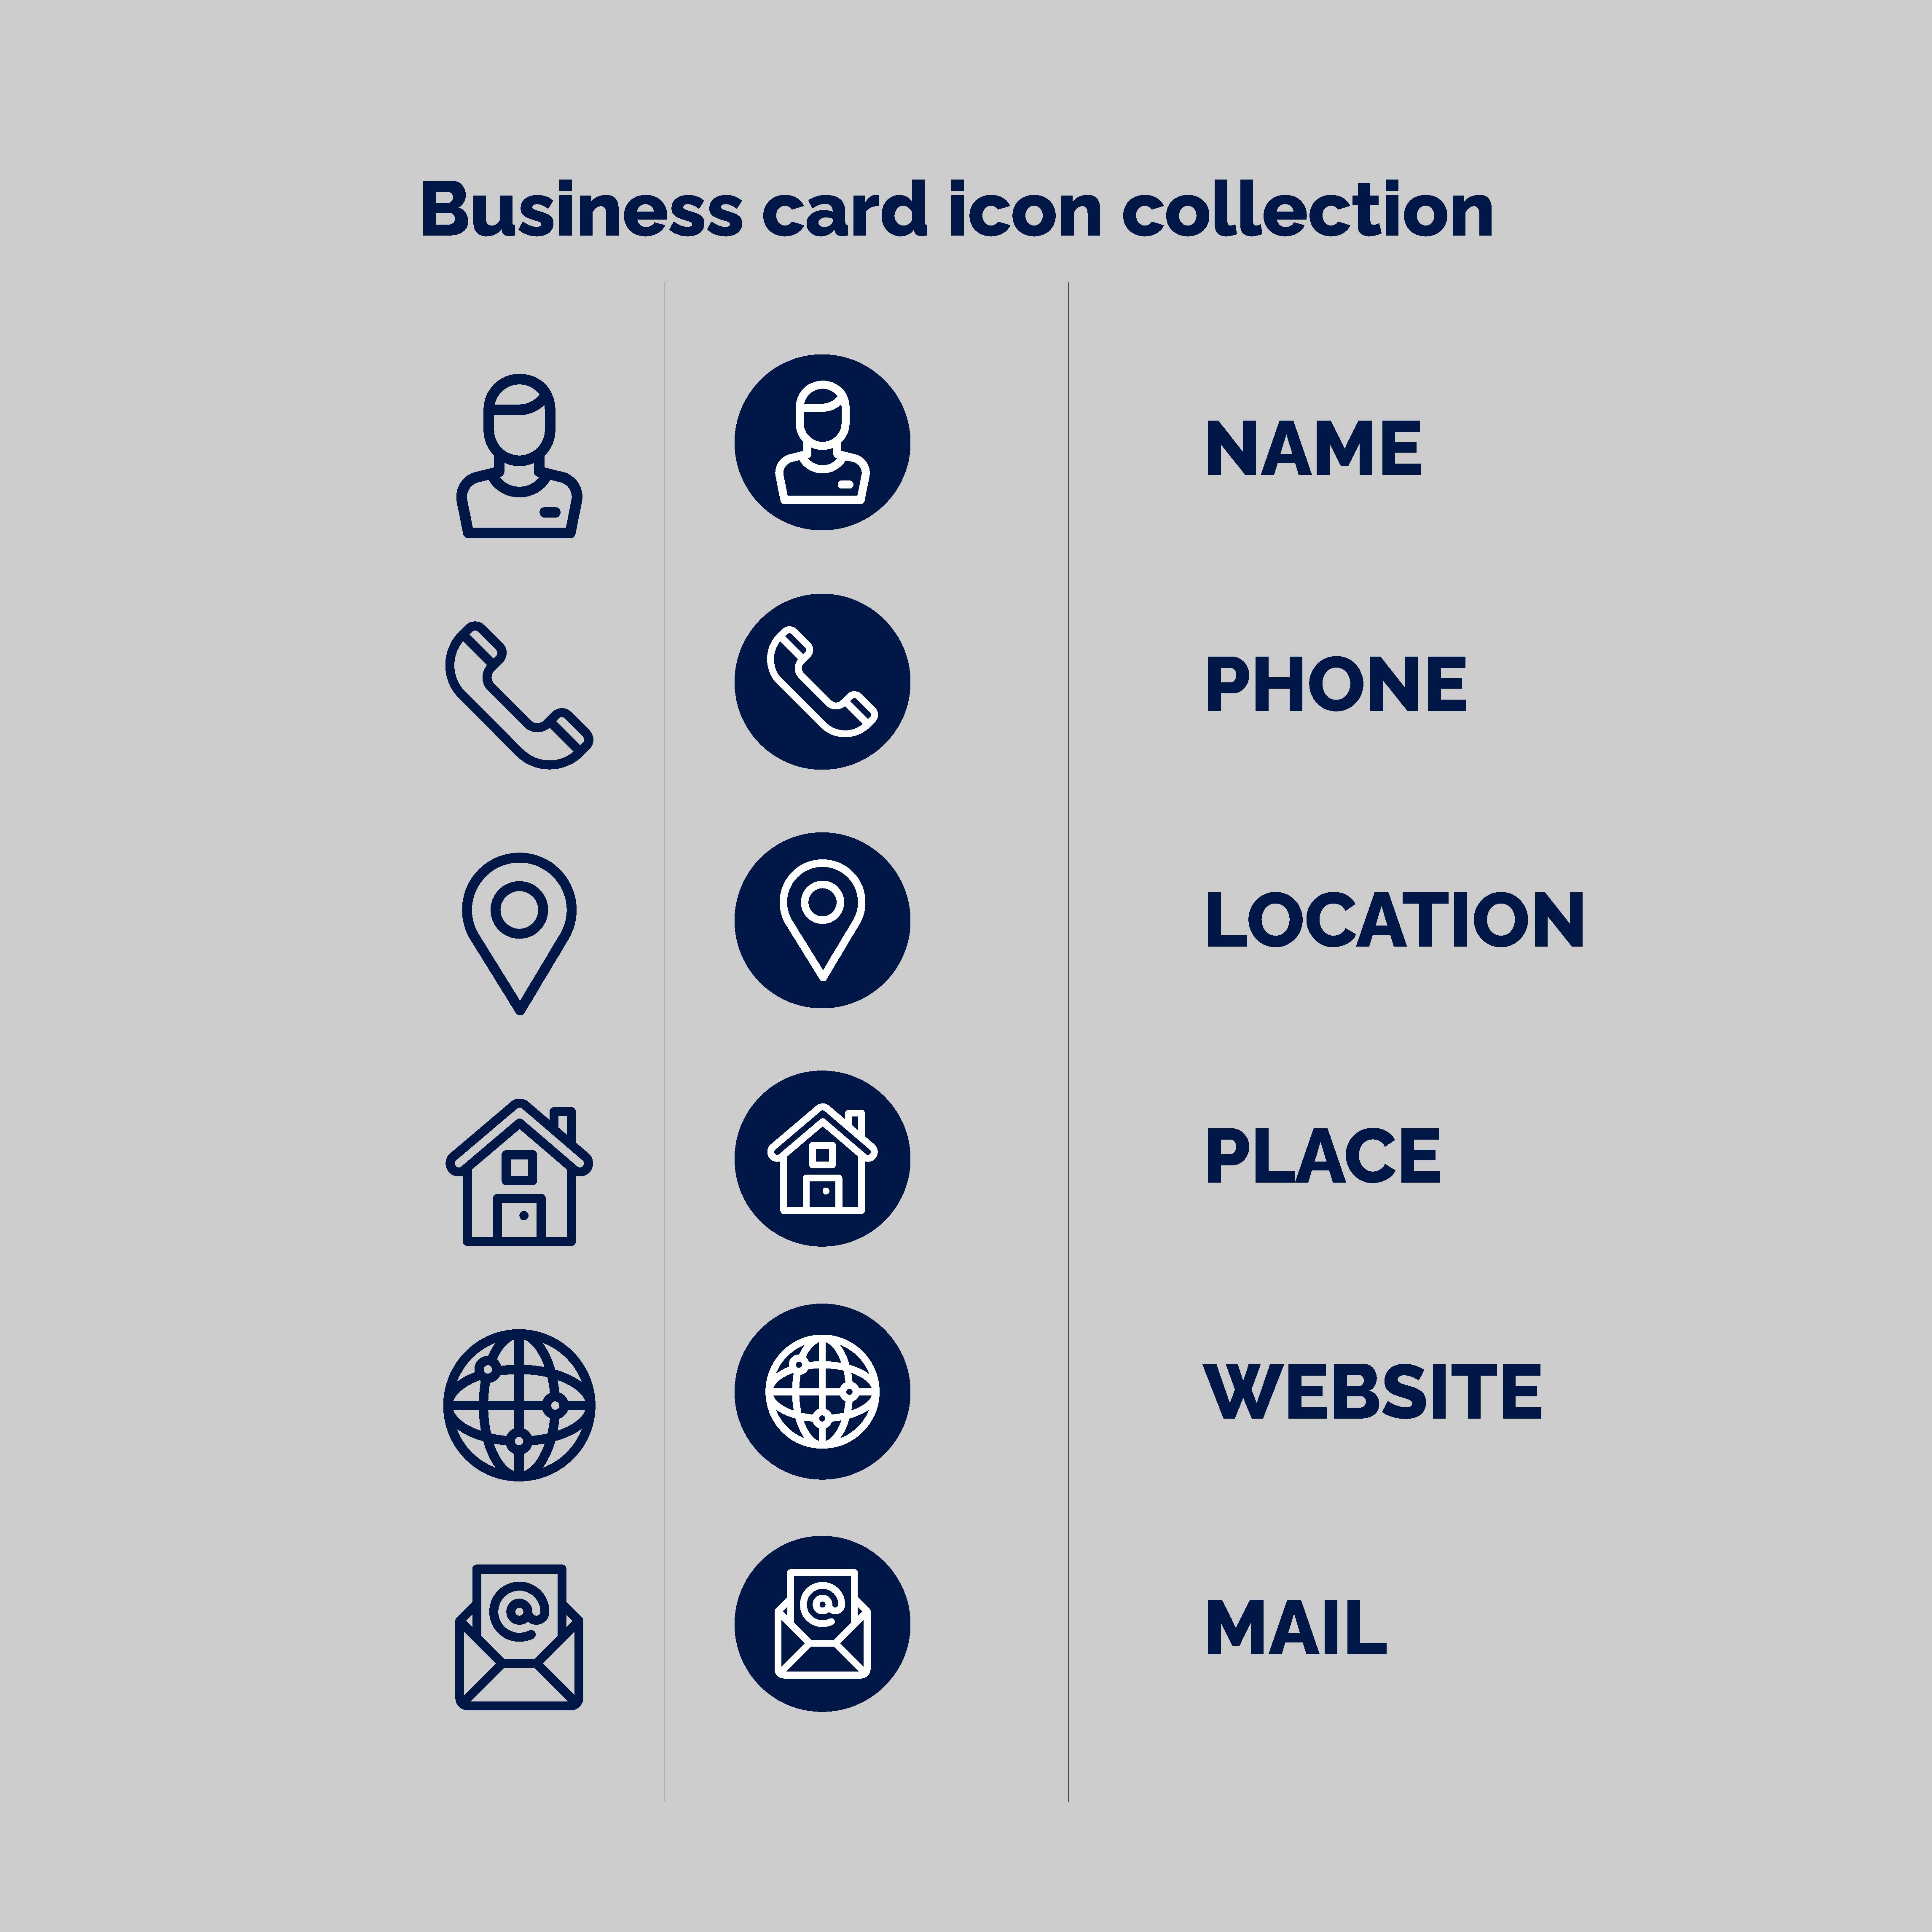 Business card icon collection preview image.